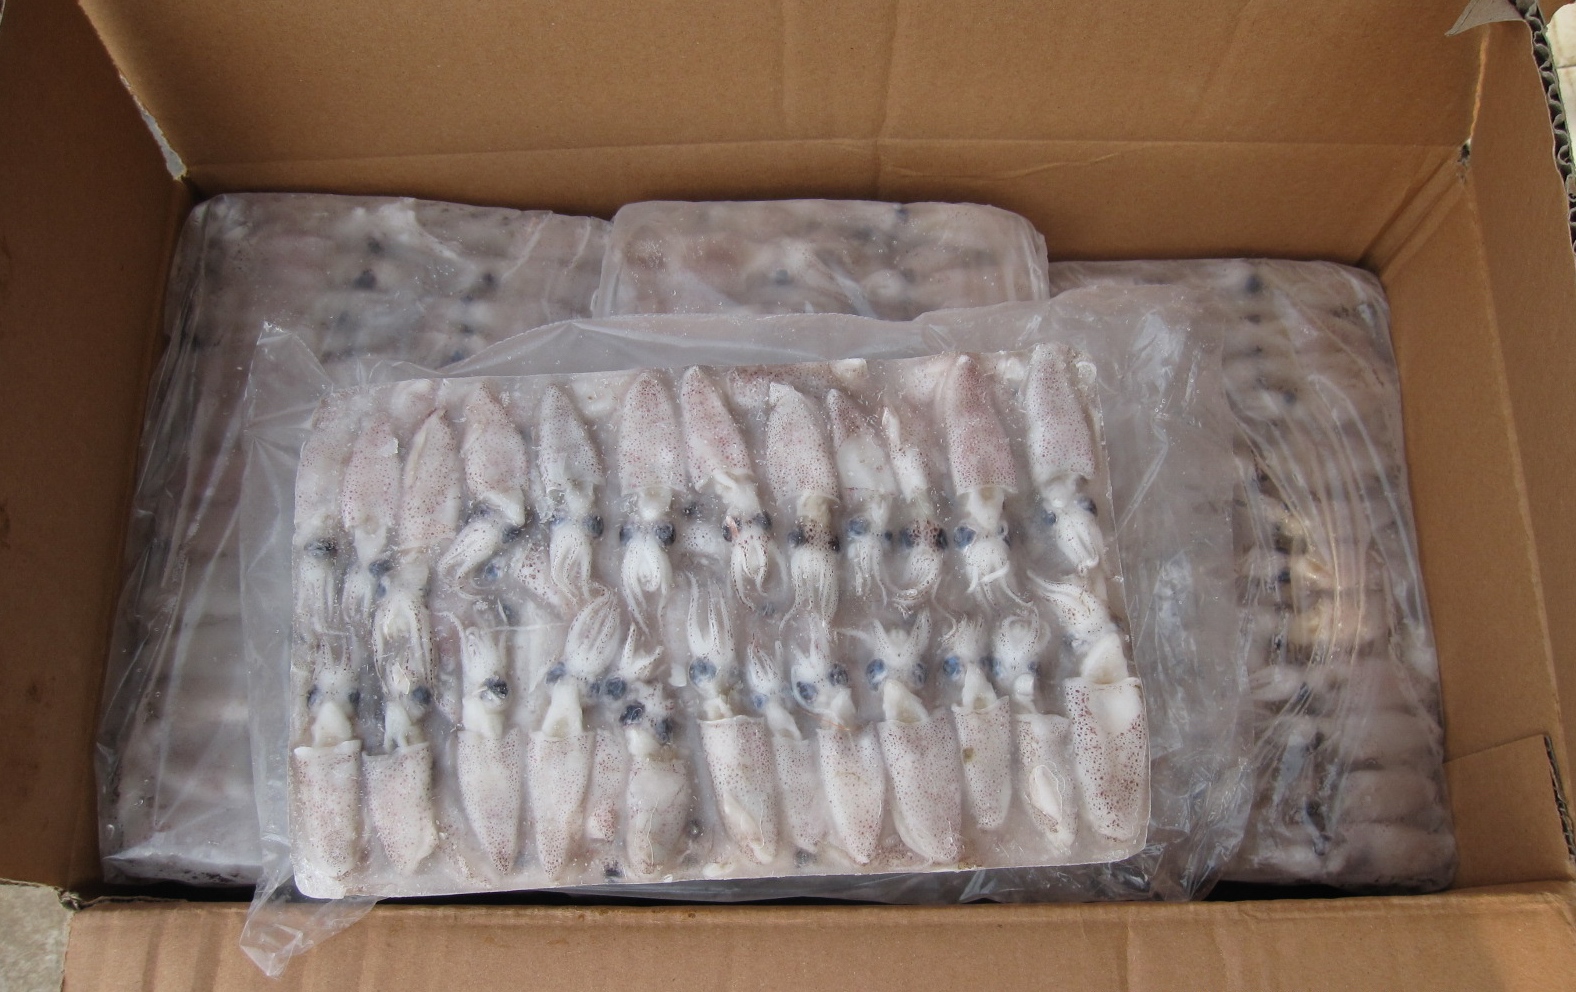 1kg block packing for Baby Squid